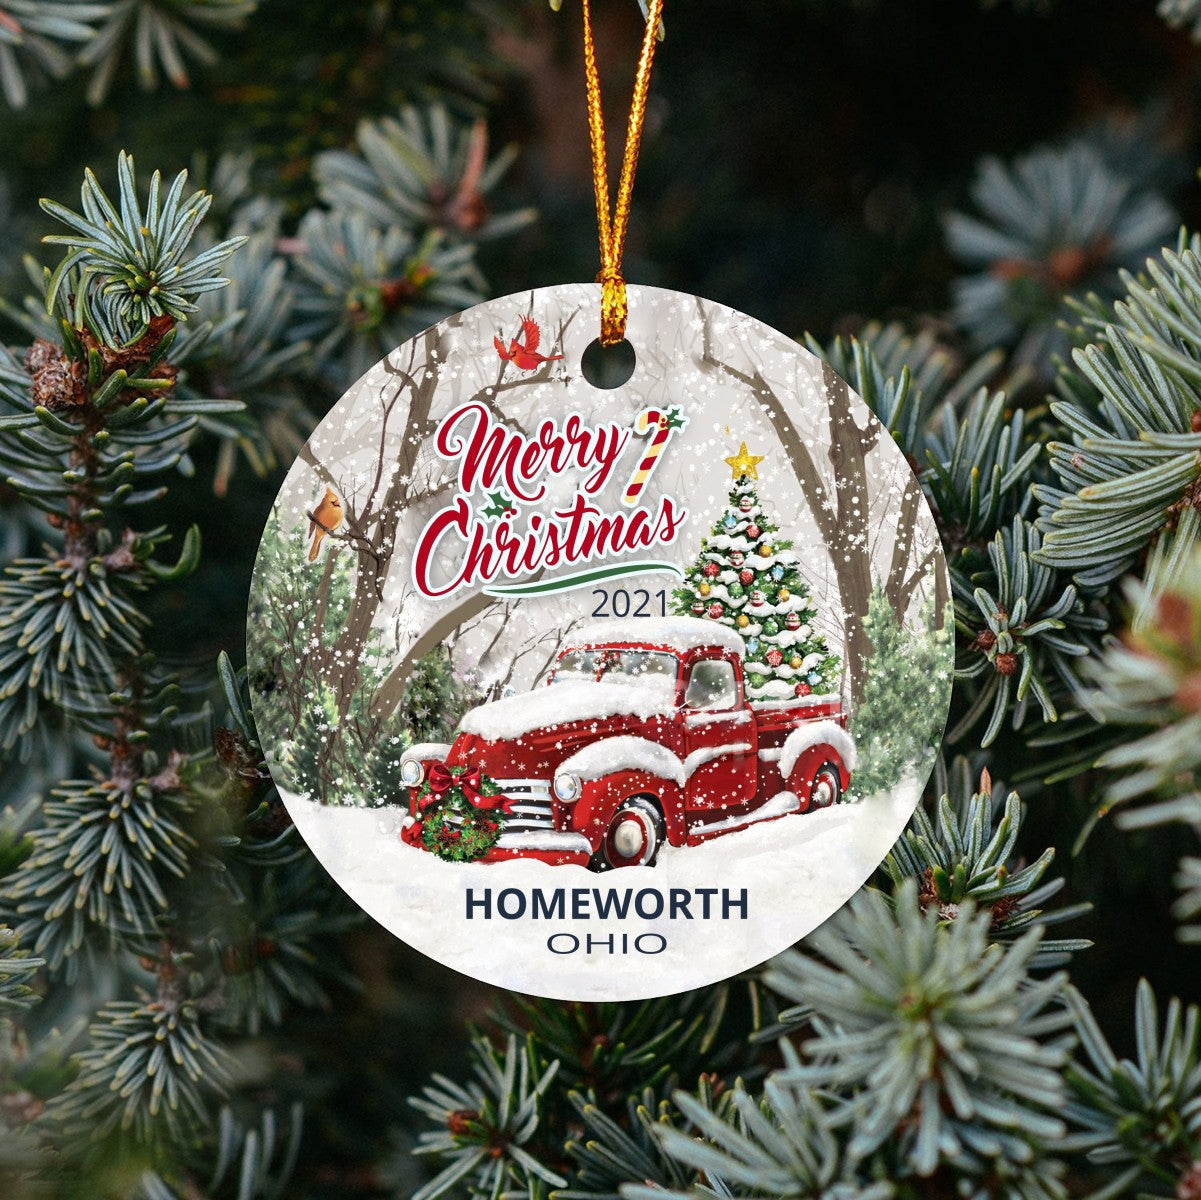 Christmas Tree Ornaments Homeworth - Ornament With Name City, State Homeworth Ohio OH Ornament - Red Truck Xmas Ornaments 3'' Plastic Gift For Family, Friend And Housewarming